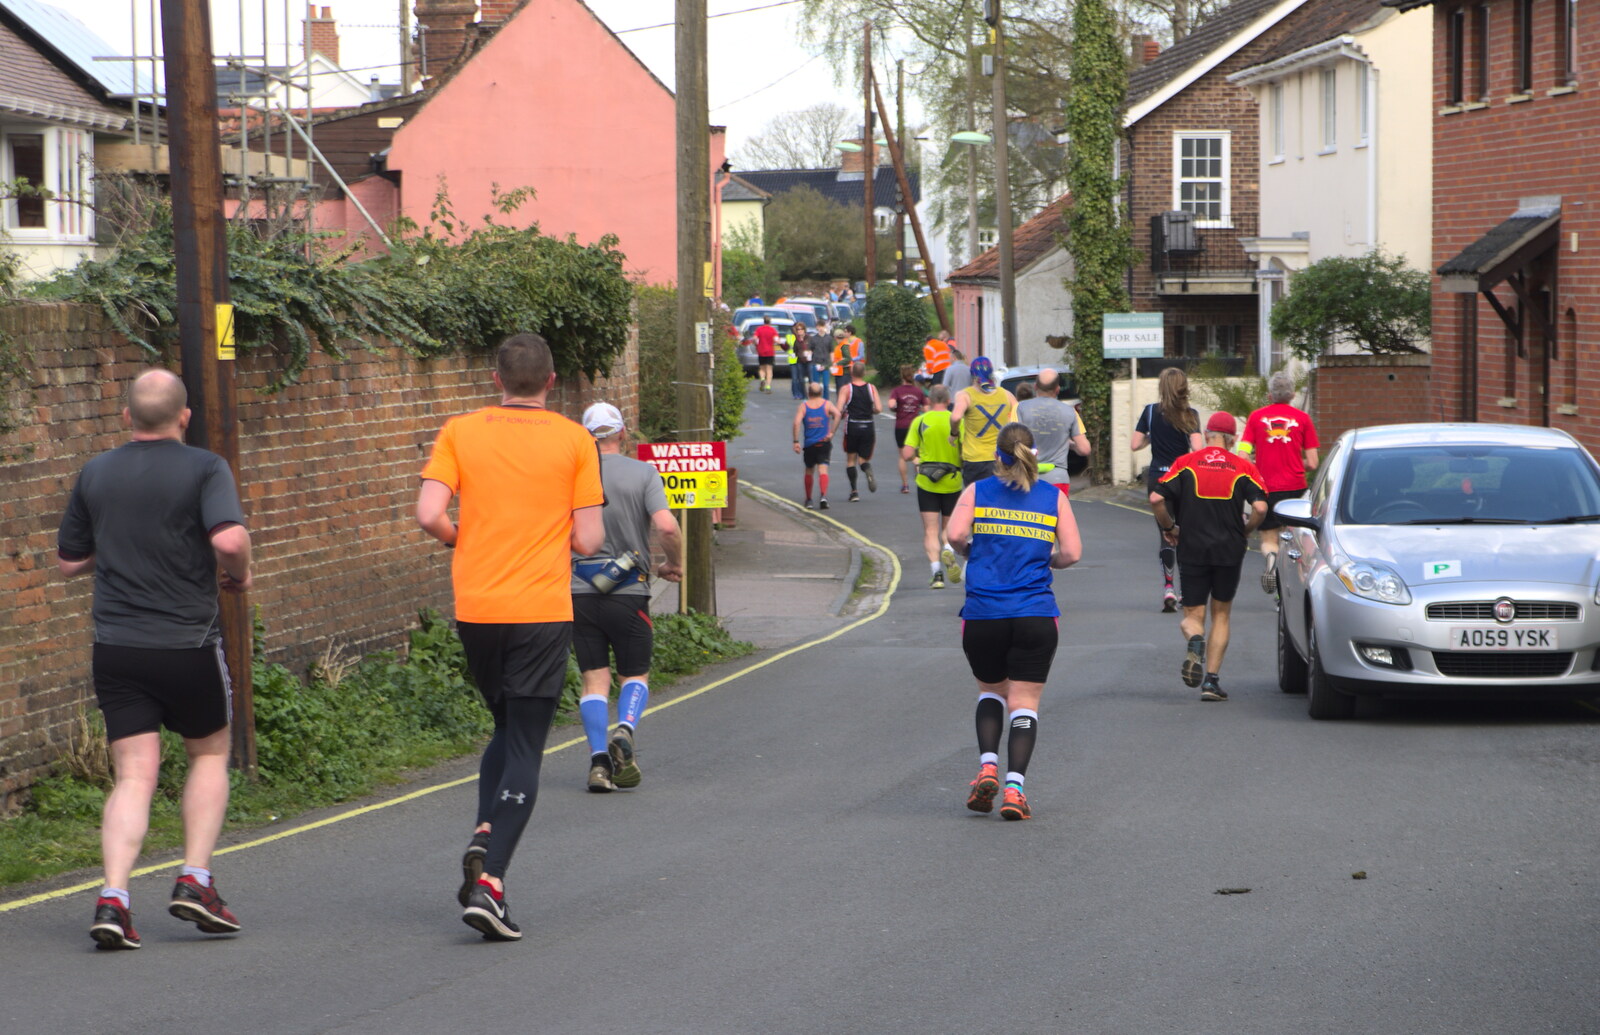 A bunch of half-marathon runners passes by from A Postcard from Beccles, Suffolk - 2nd April 2017